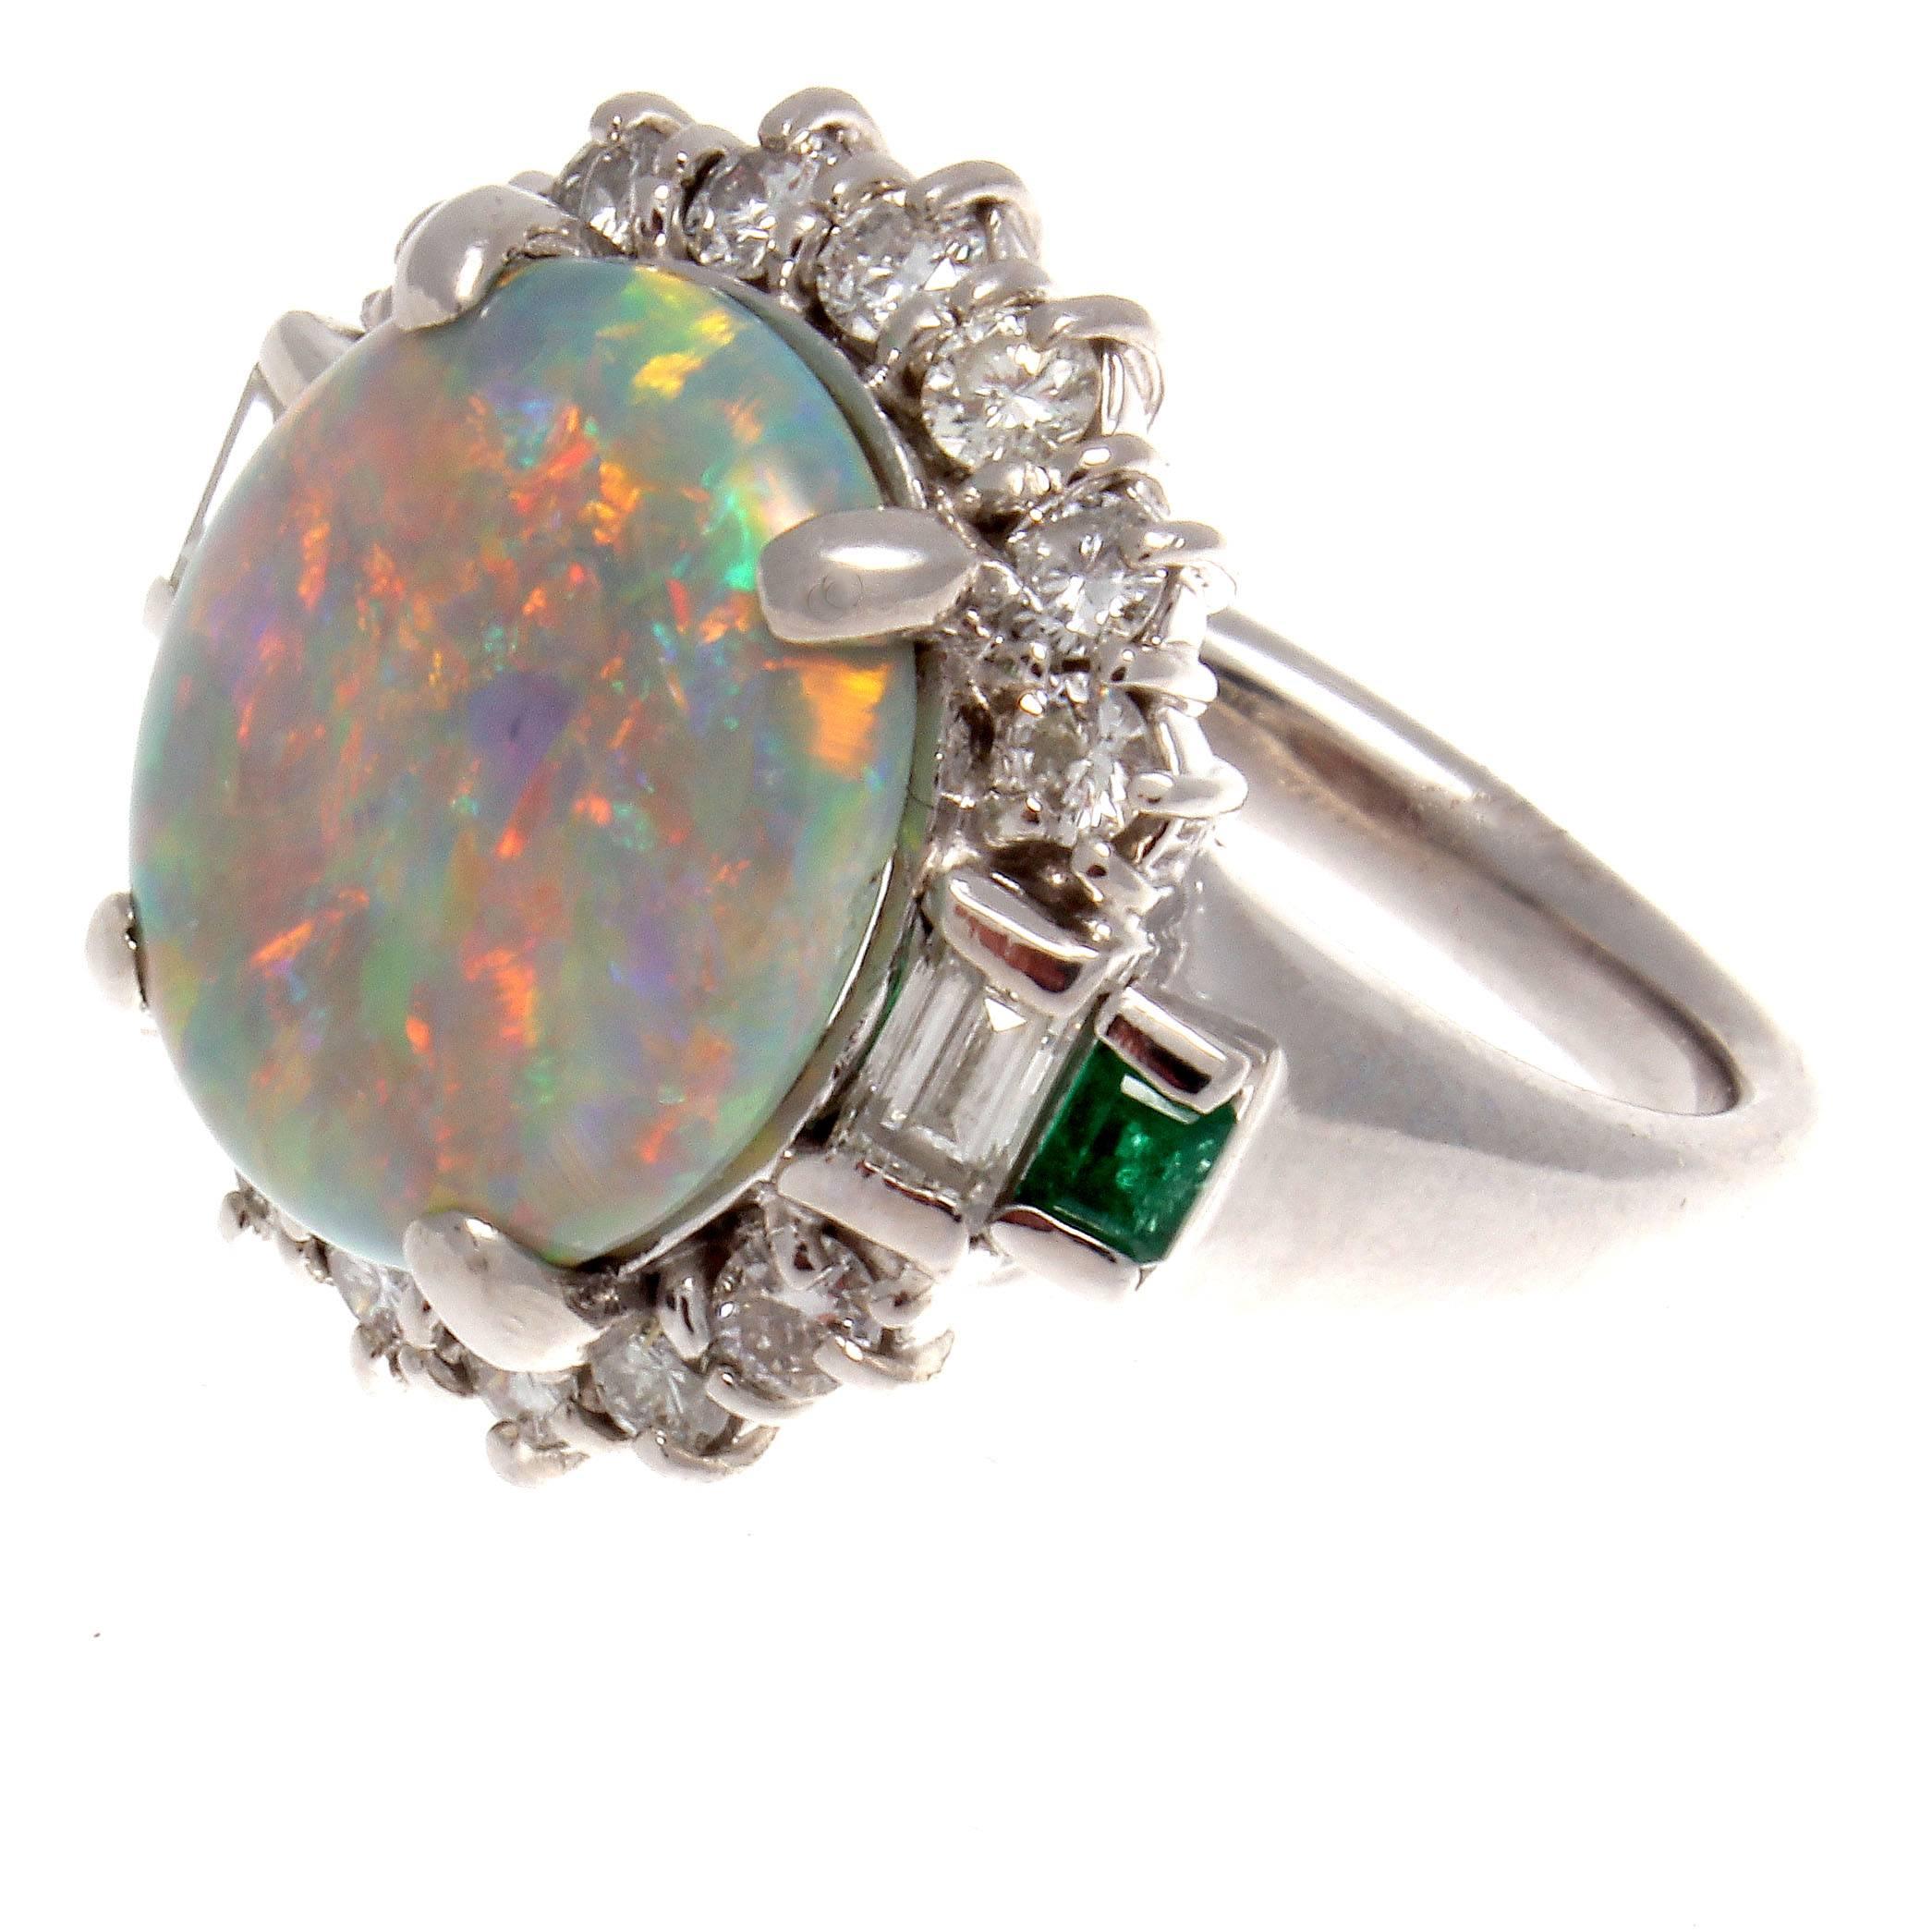 Good opals are like a painters palette.  This opal is particularly colorful and radiates the best of Impressionist art. A 4.47 carat opal that features an array of colors perfectly surrounded by colorless diamonds weighing 0.92 carats and accented